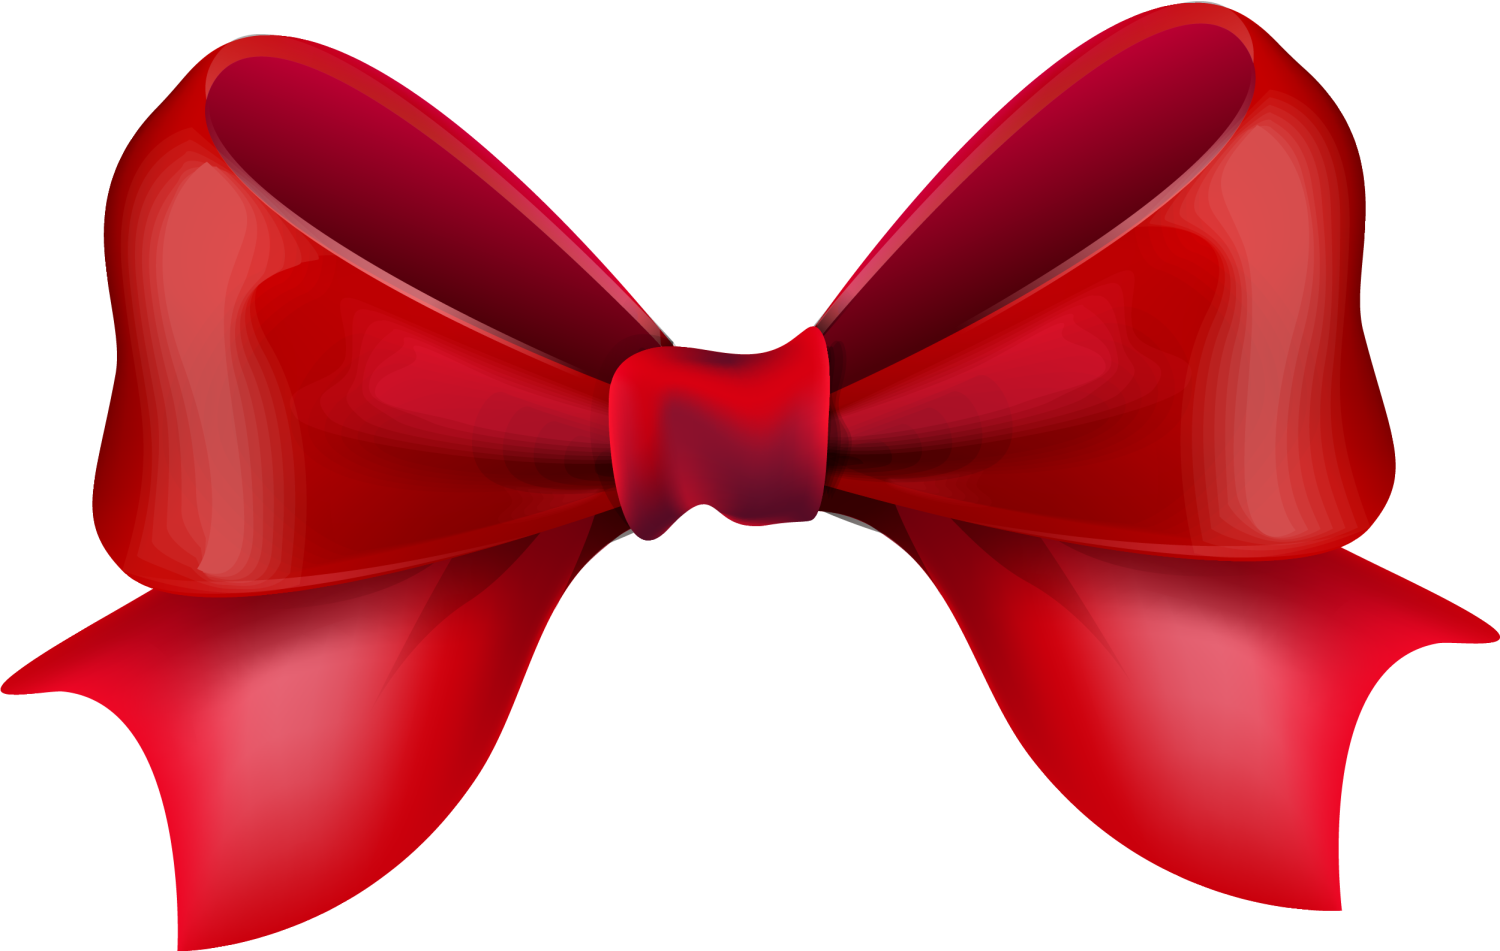 Glossy Red Bow Illustration PNG